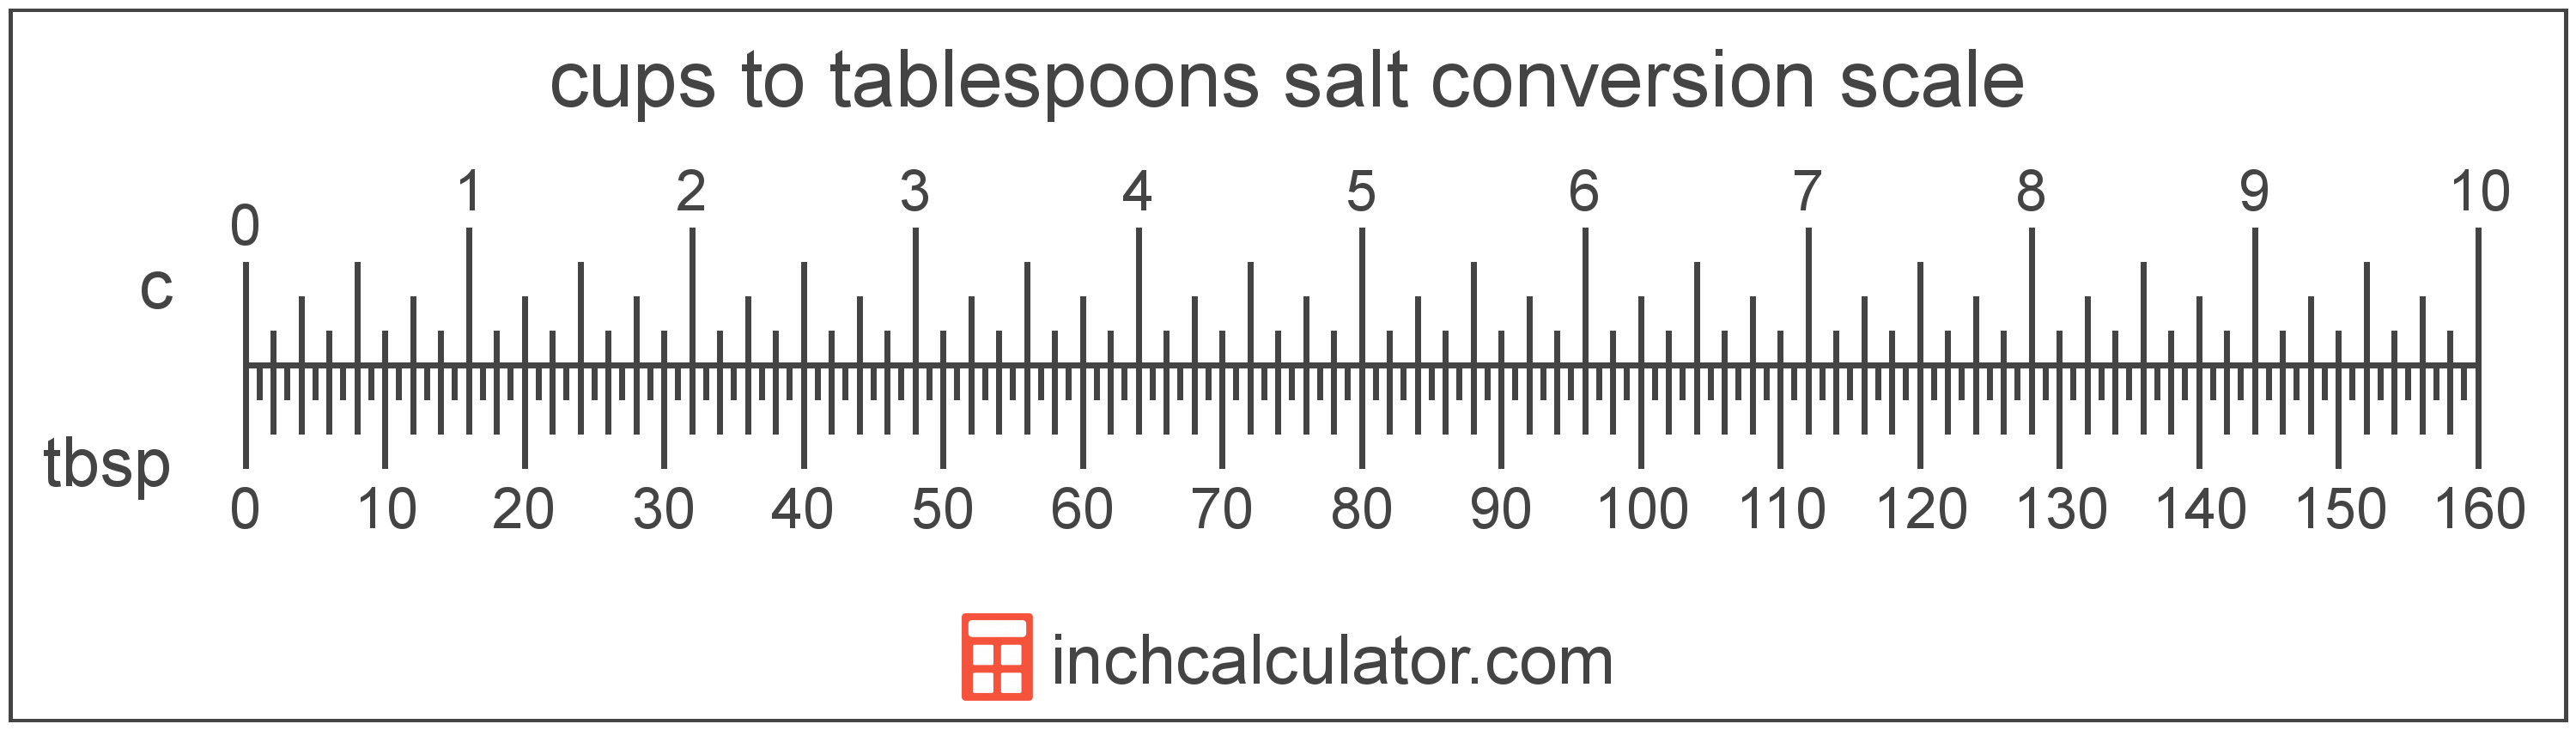 conversion scale showing tablespoons and equivalent cups salt volume values